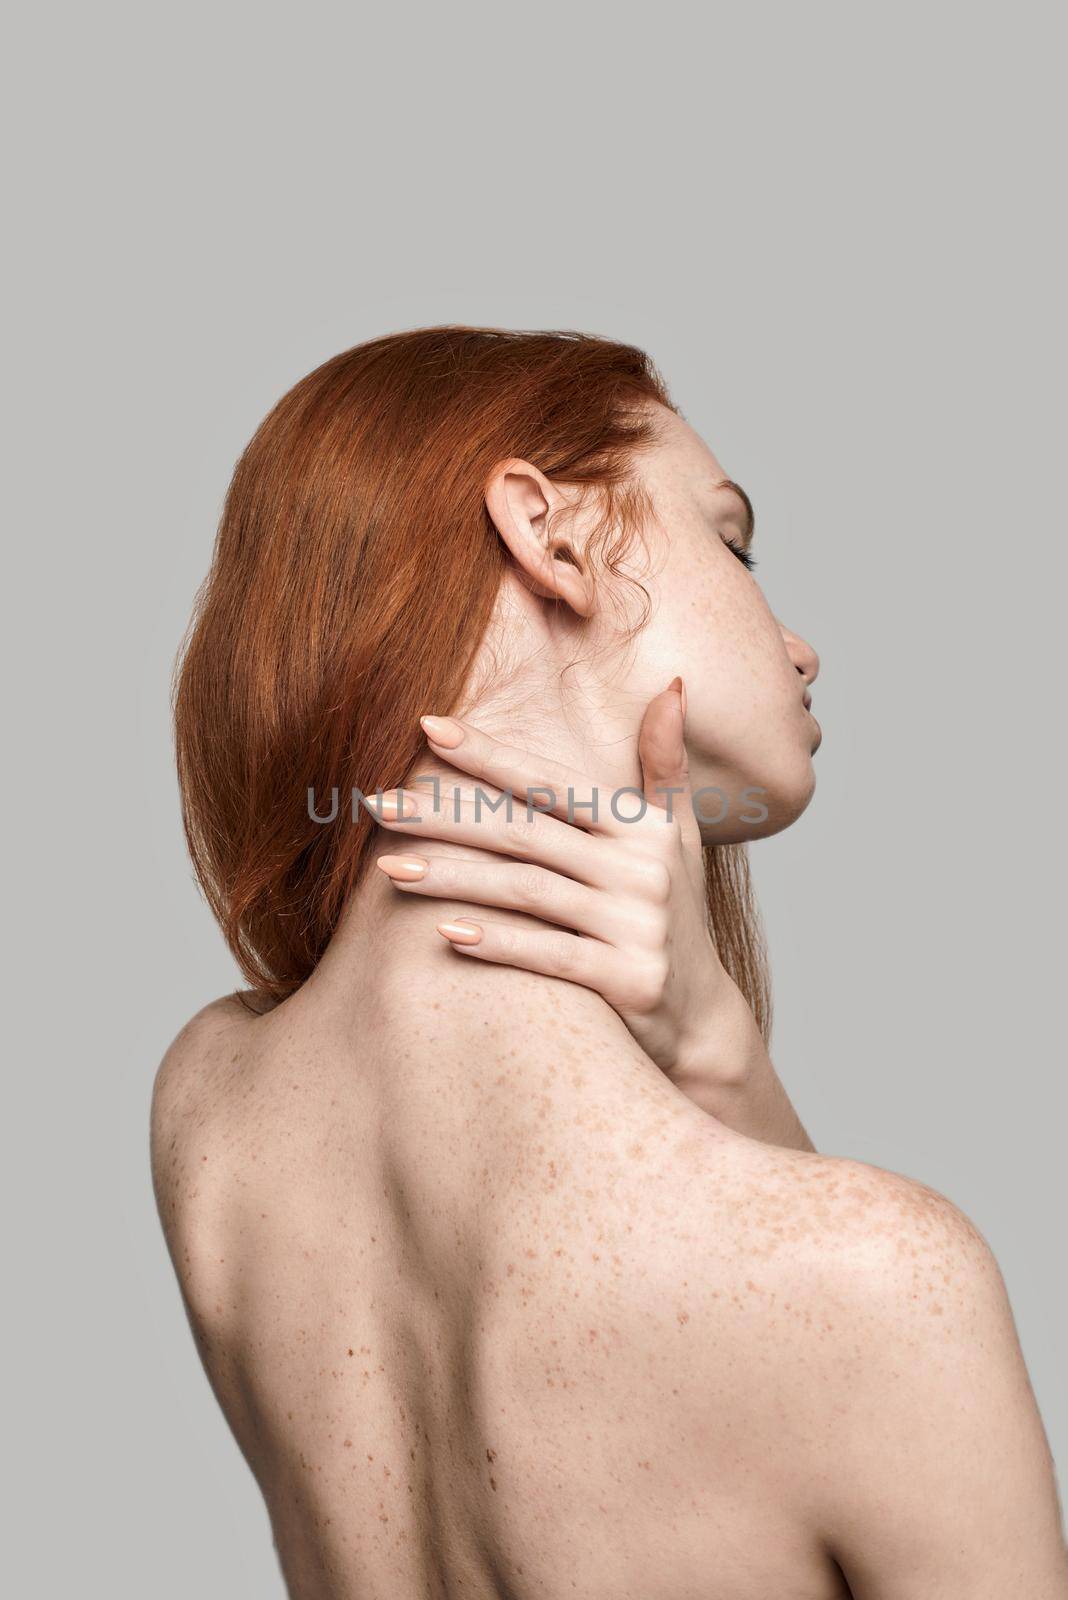 Studio shot of back view of young and beautiful redhead woman touching her neck while standing against grey background